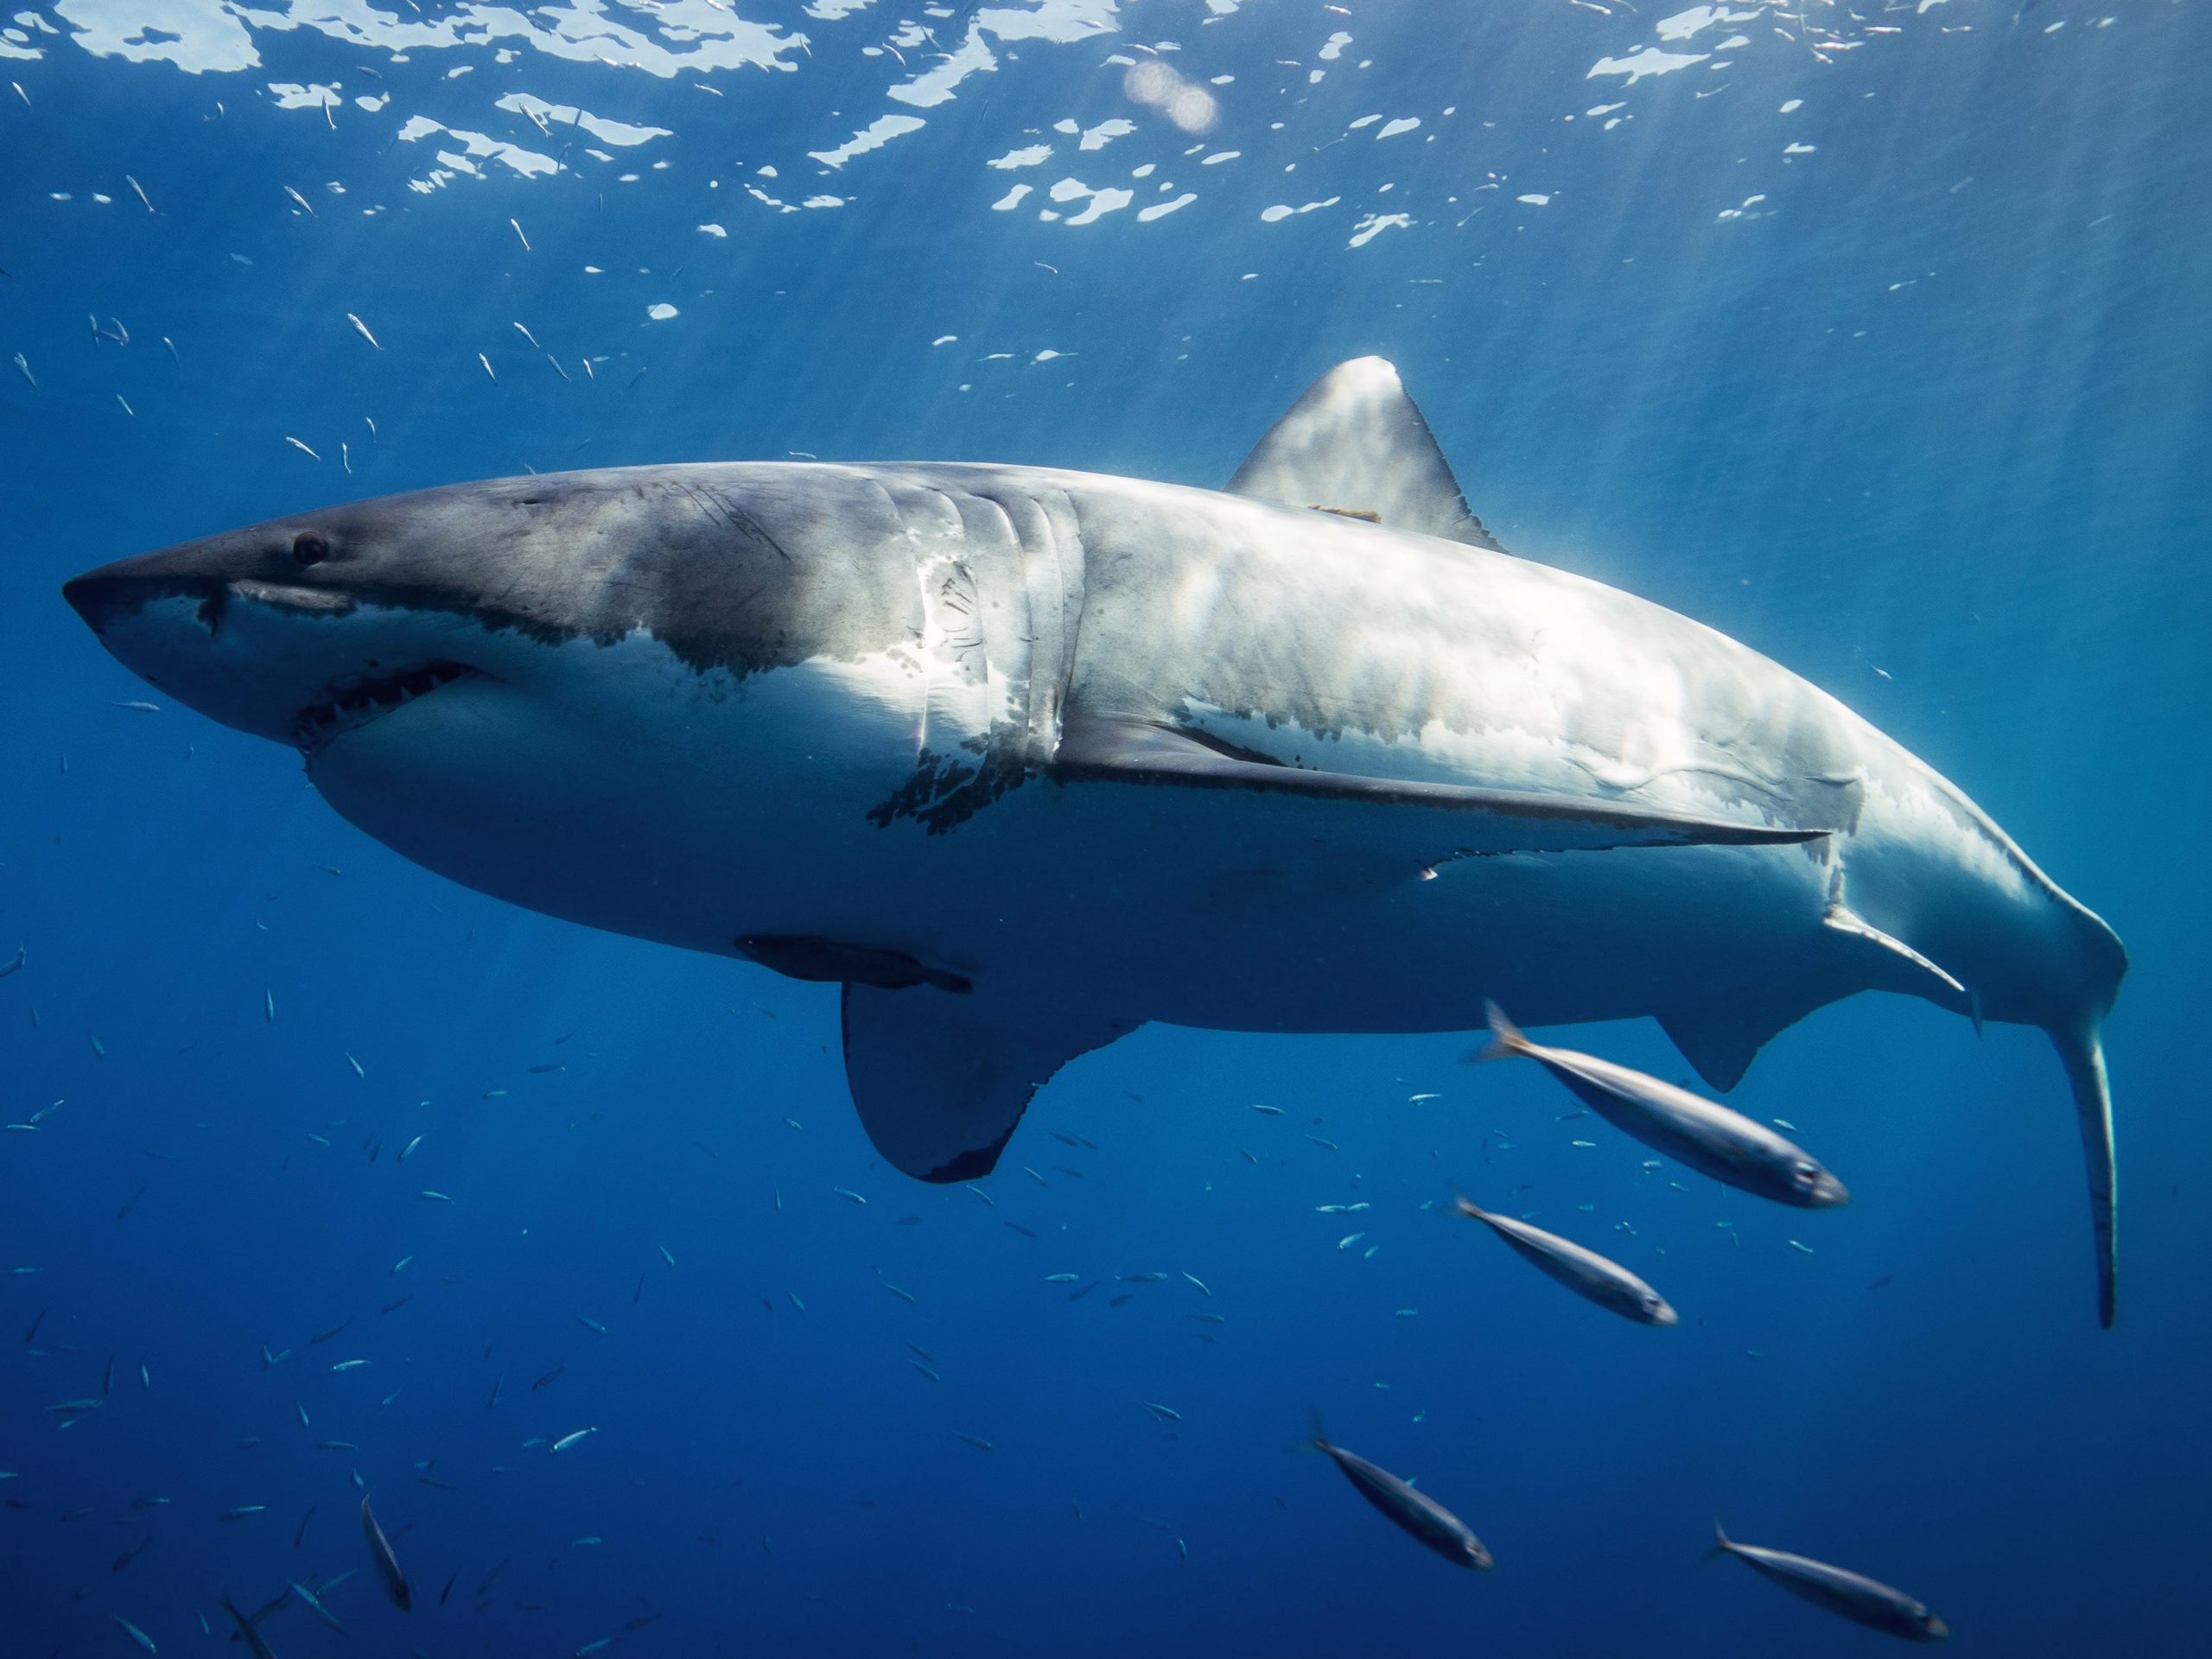 A great white shark at Guadalupe Island, Mexico.